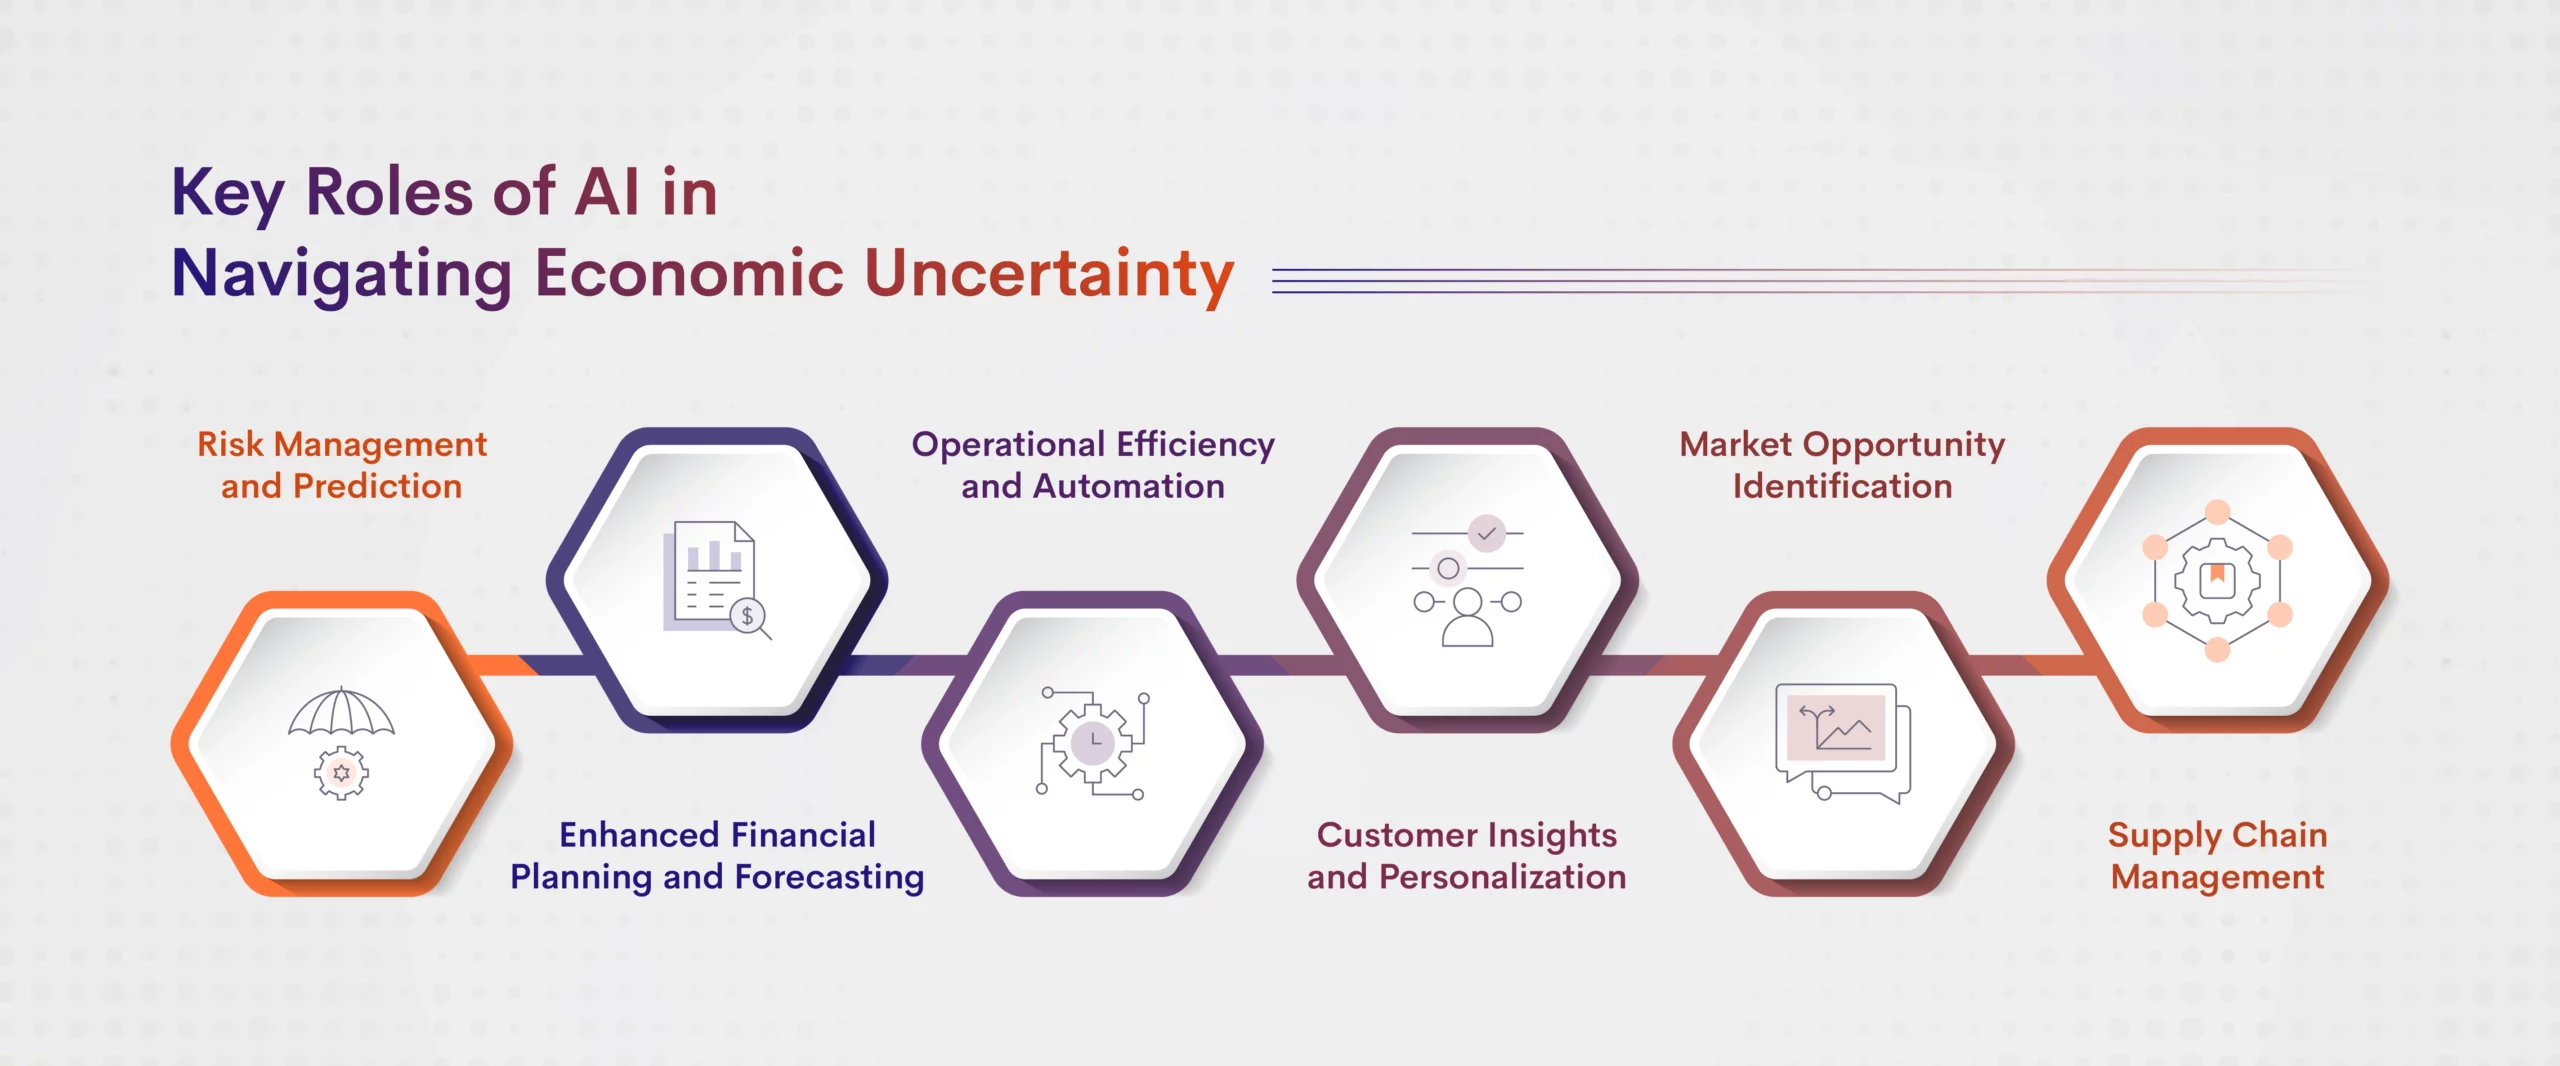 Navigating Economic Uncertainty with Artificial Intelligence
